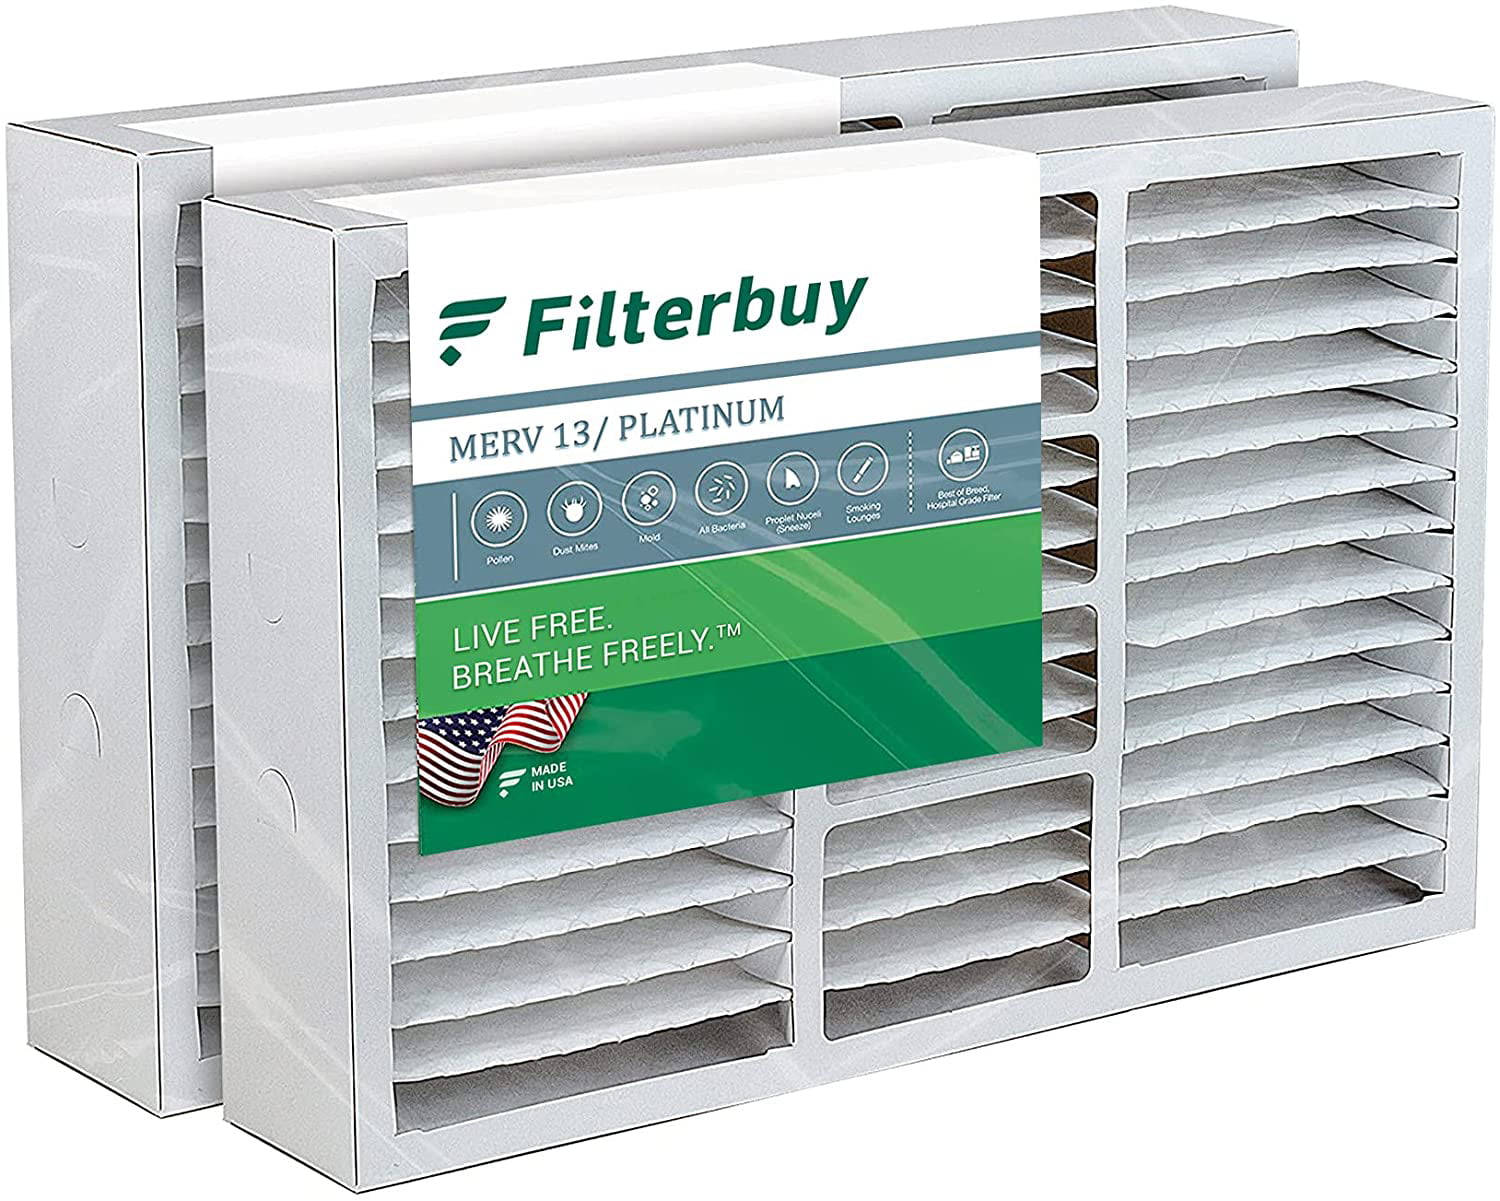 FilterBuy 20x25.25x3.5 Air Filter MERV 13 2-Pack, Platinum Pleated Replacement HVAC AC Furnace Filters for Aprilaire Space-Gard 